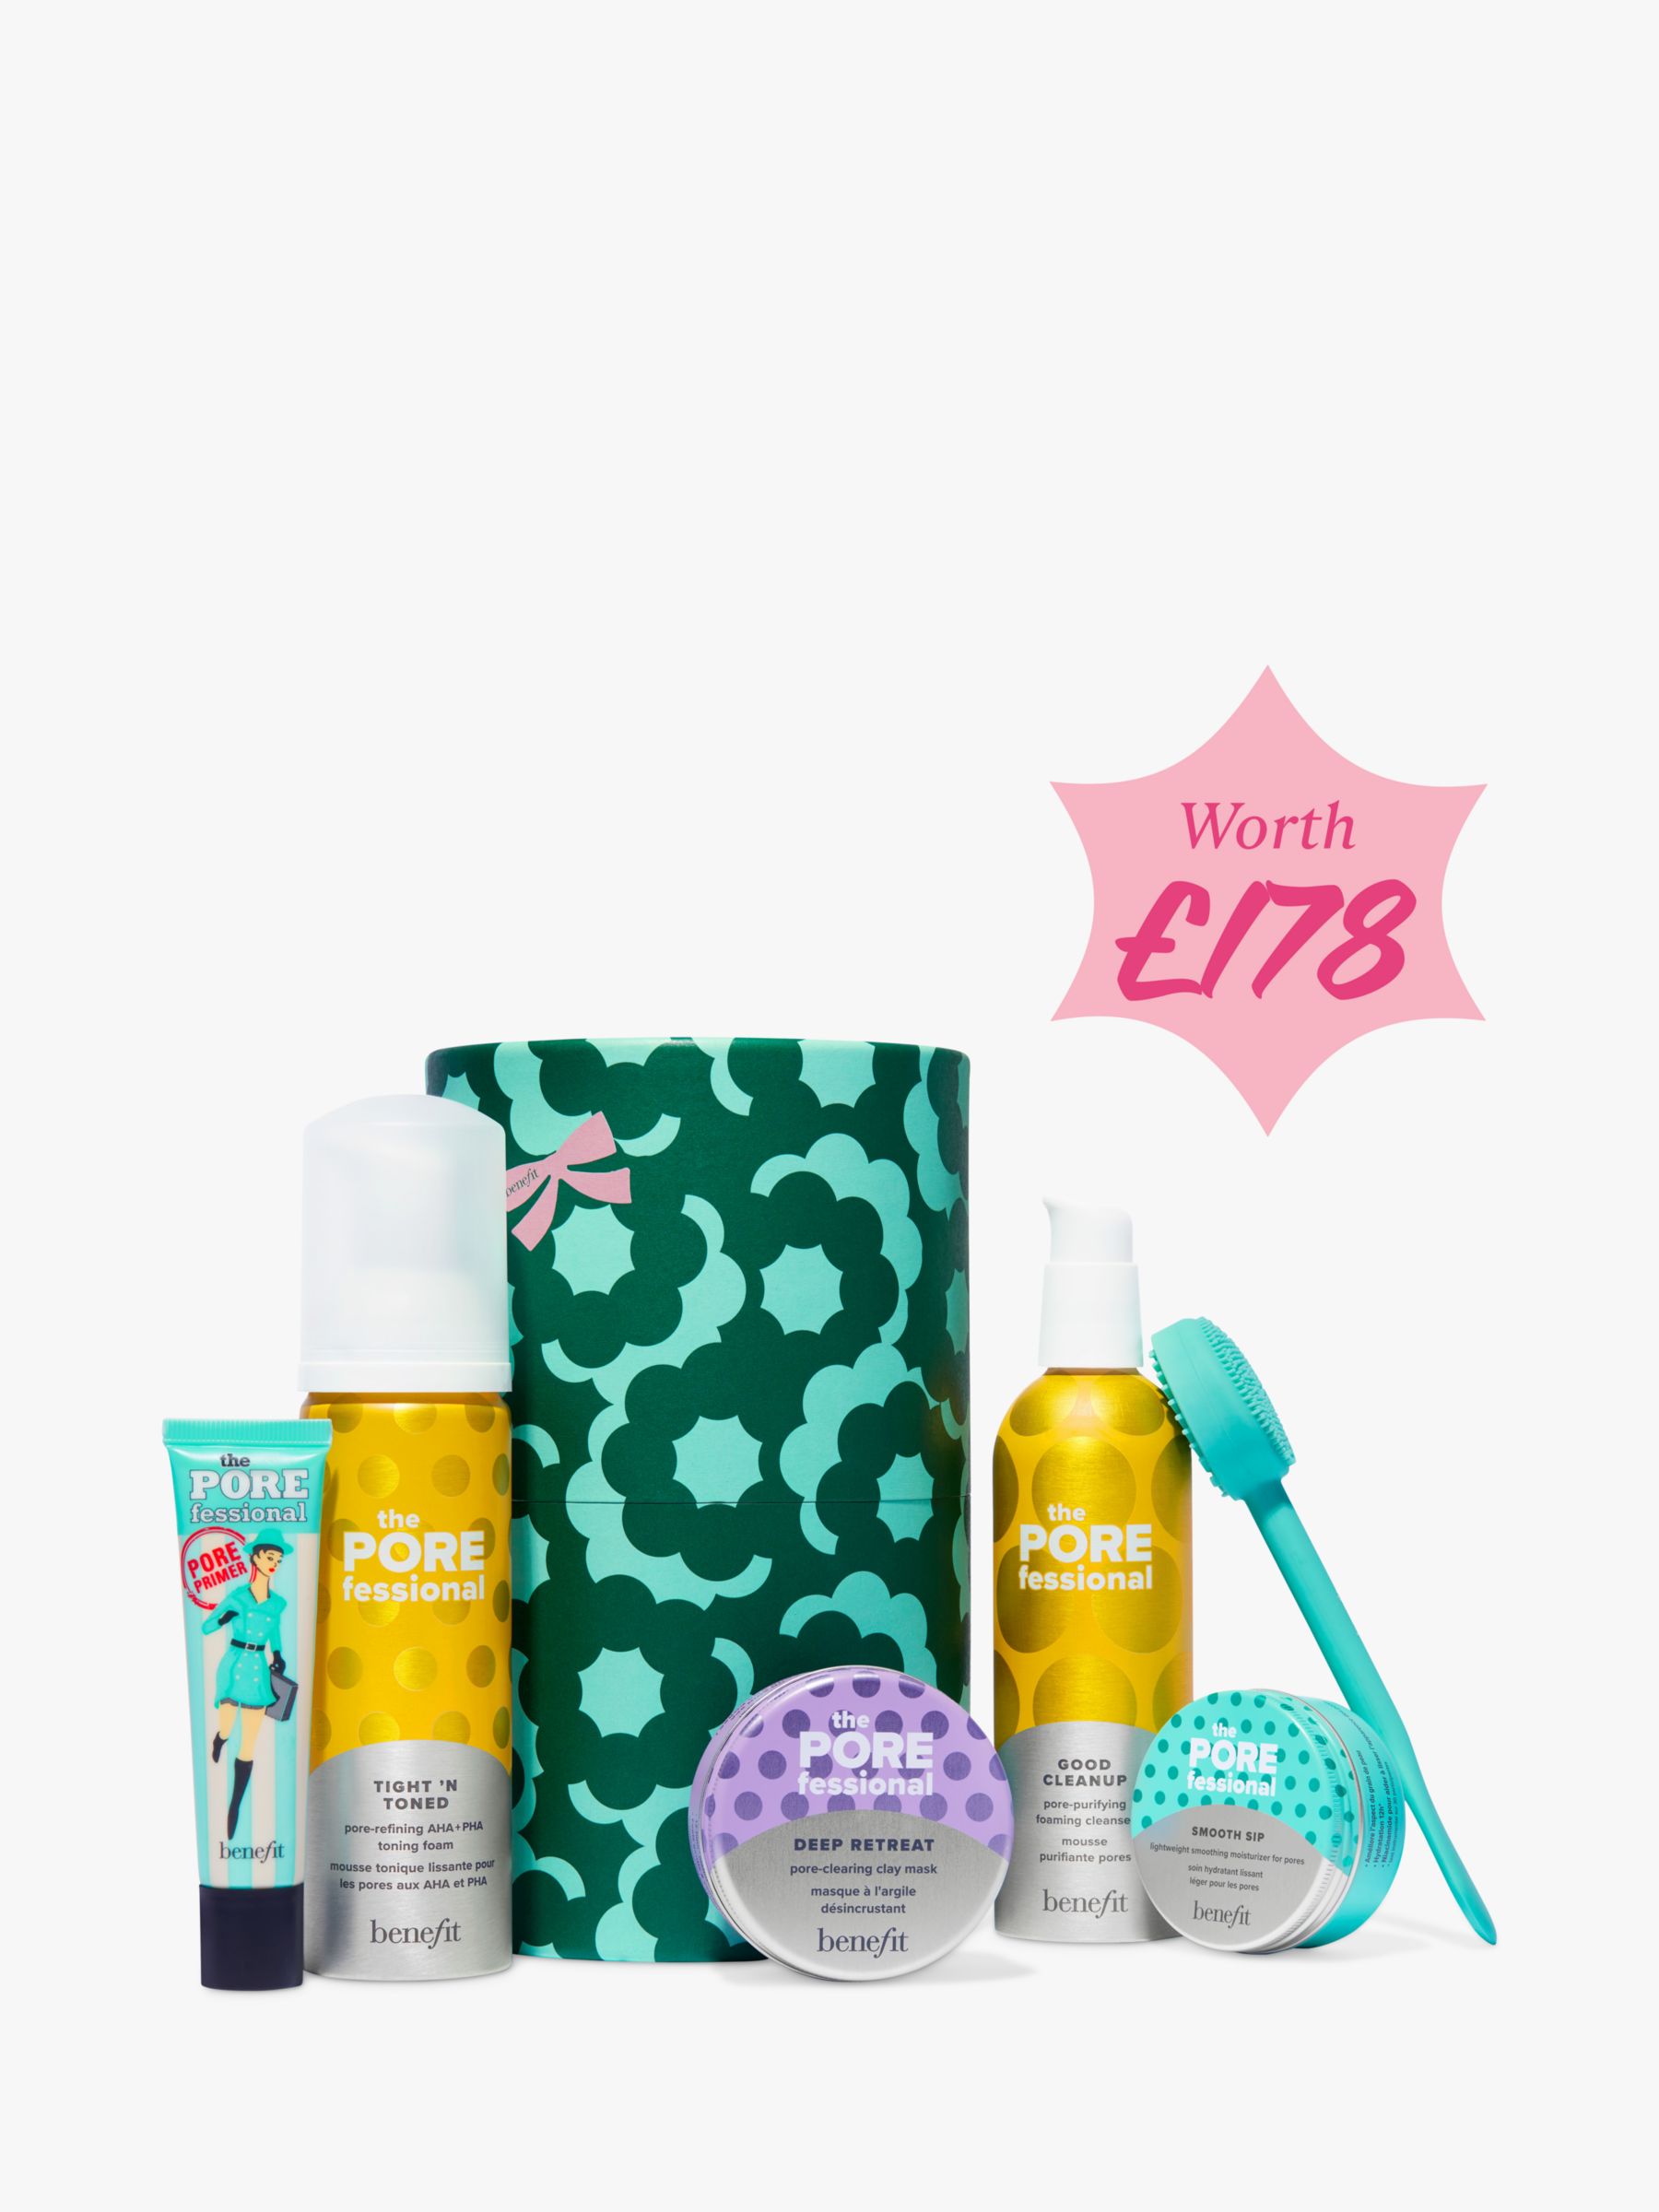 Benefit The PORE The Merrier Skincare Gift Set 8